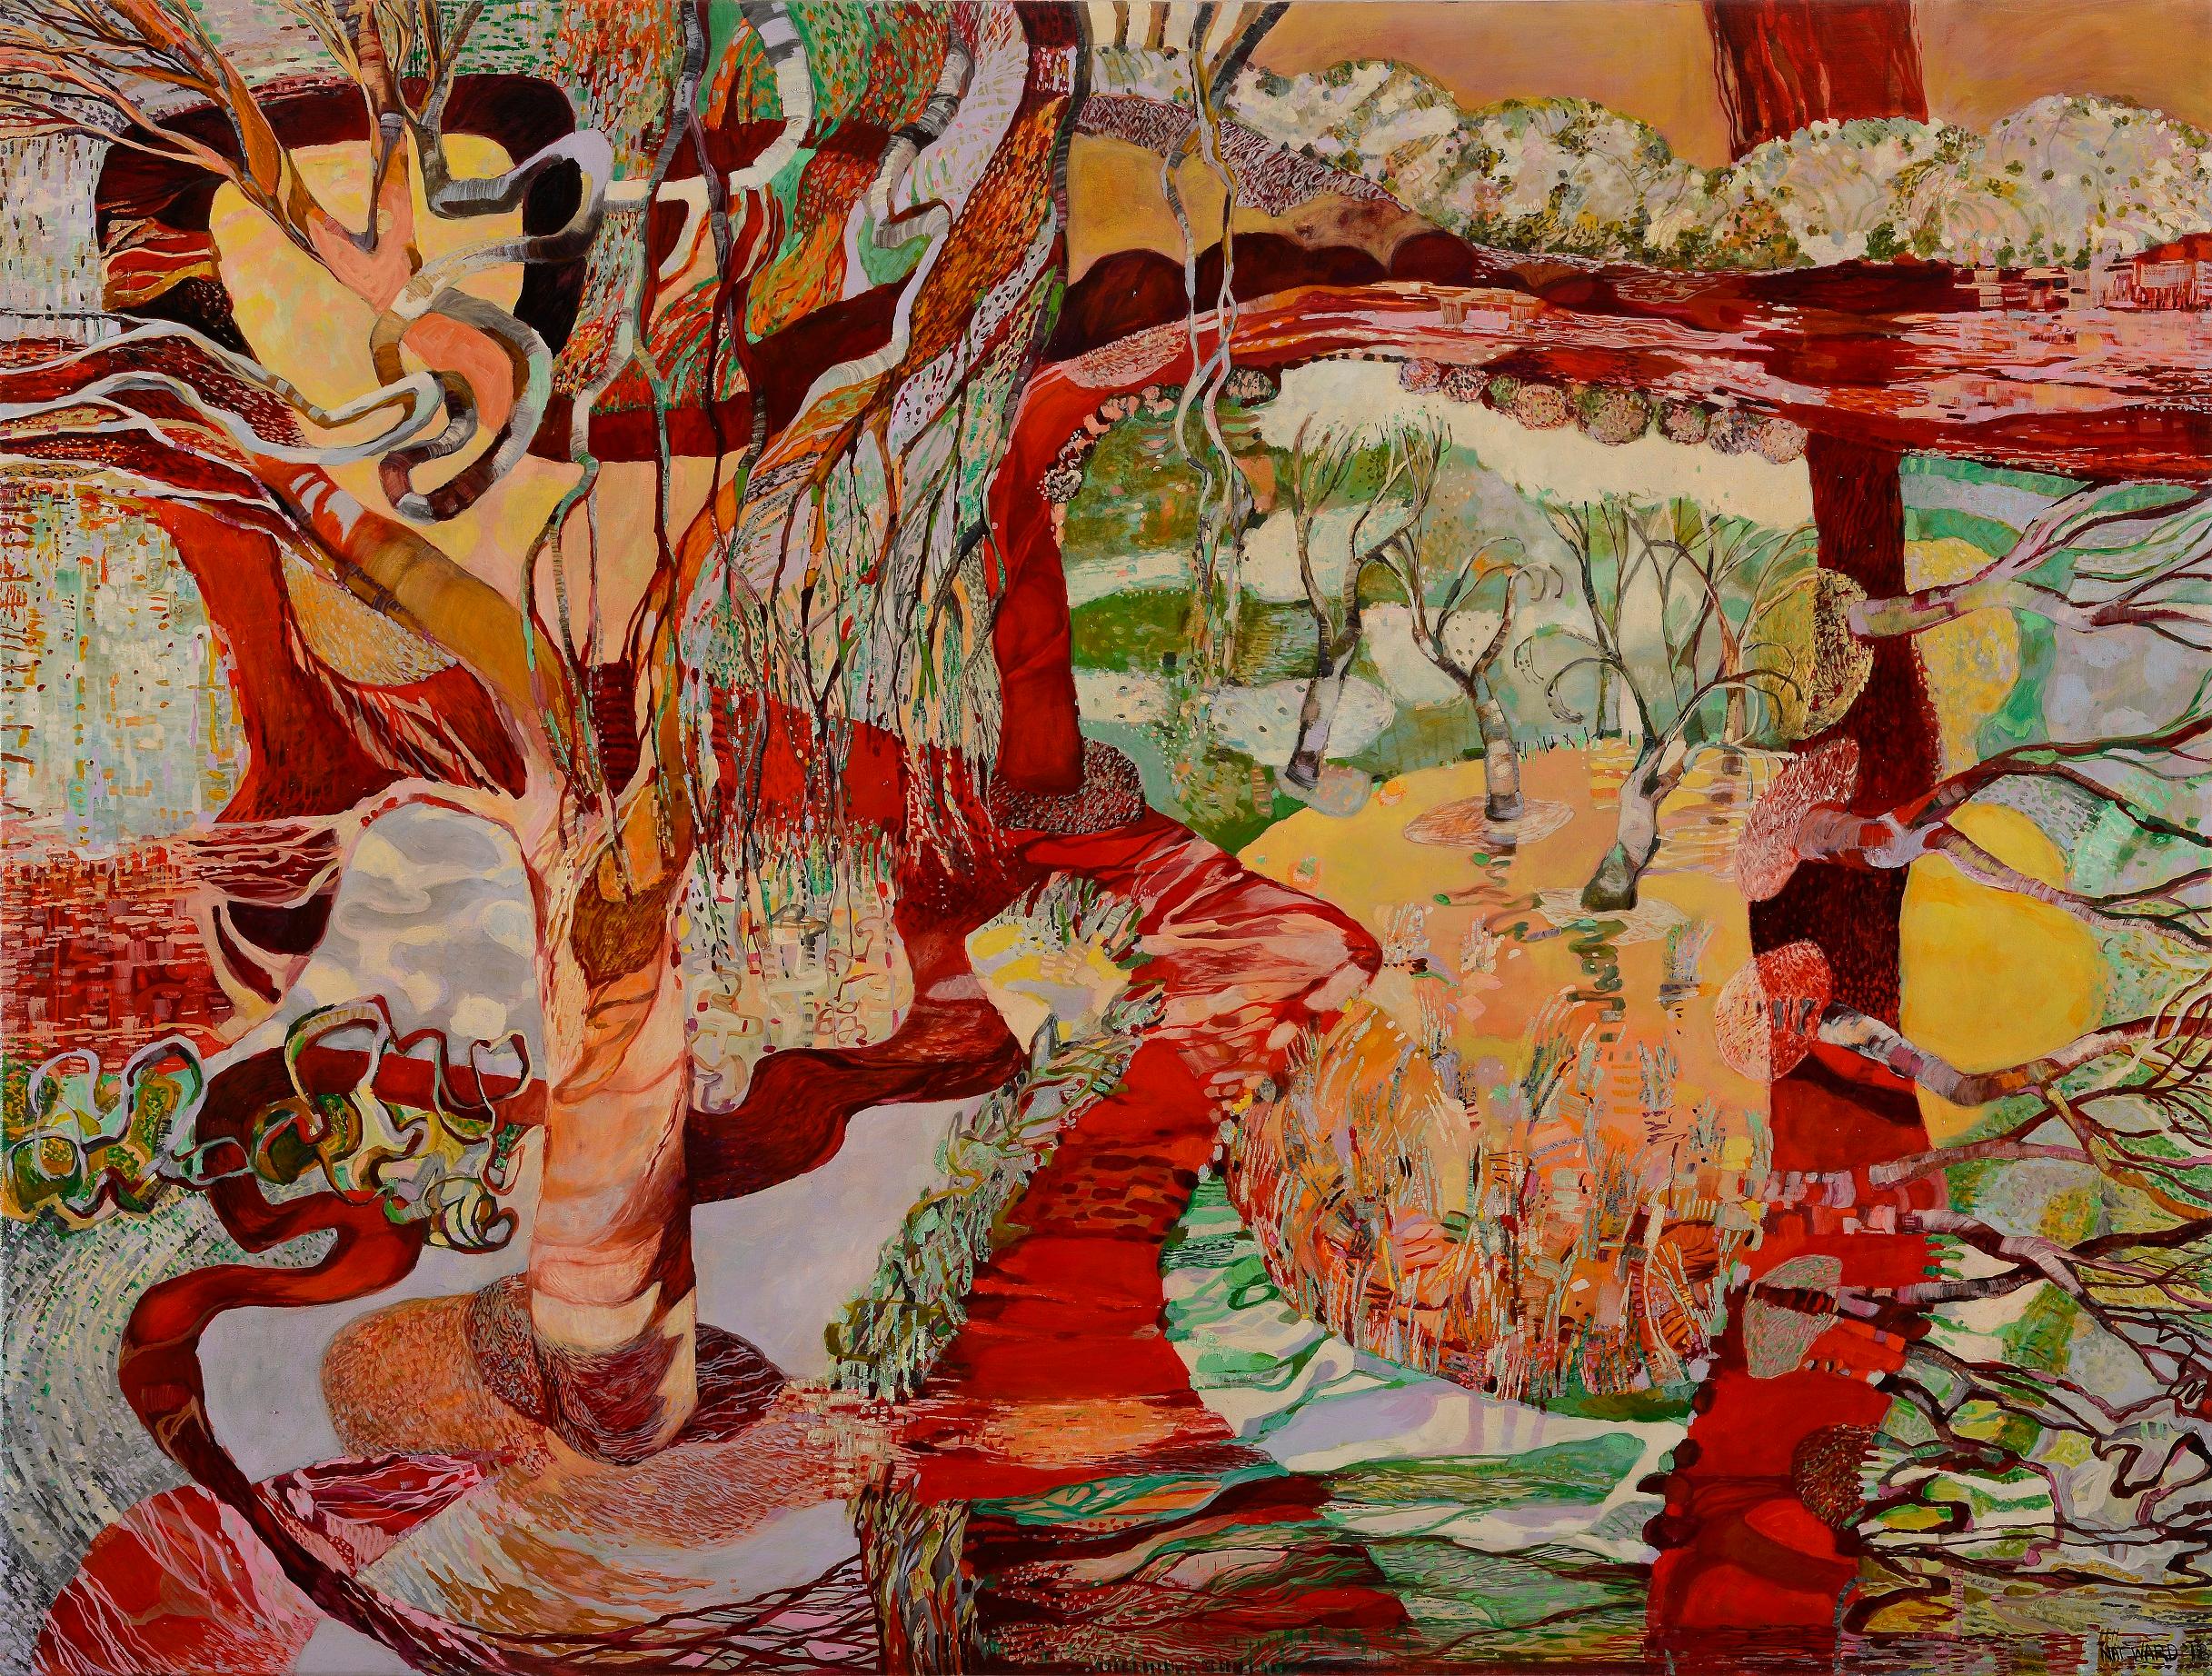 About the Artist:
Unexpected myriads sprout in the dancing leaves and branches of Nat Ward’s wetlands paintings. Their rich surfaces reference “mosaics, textiles, hieroglyphics even Asian script.” Based in Albury, Ward says her paintings are ‘an